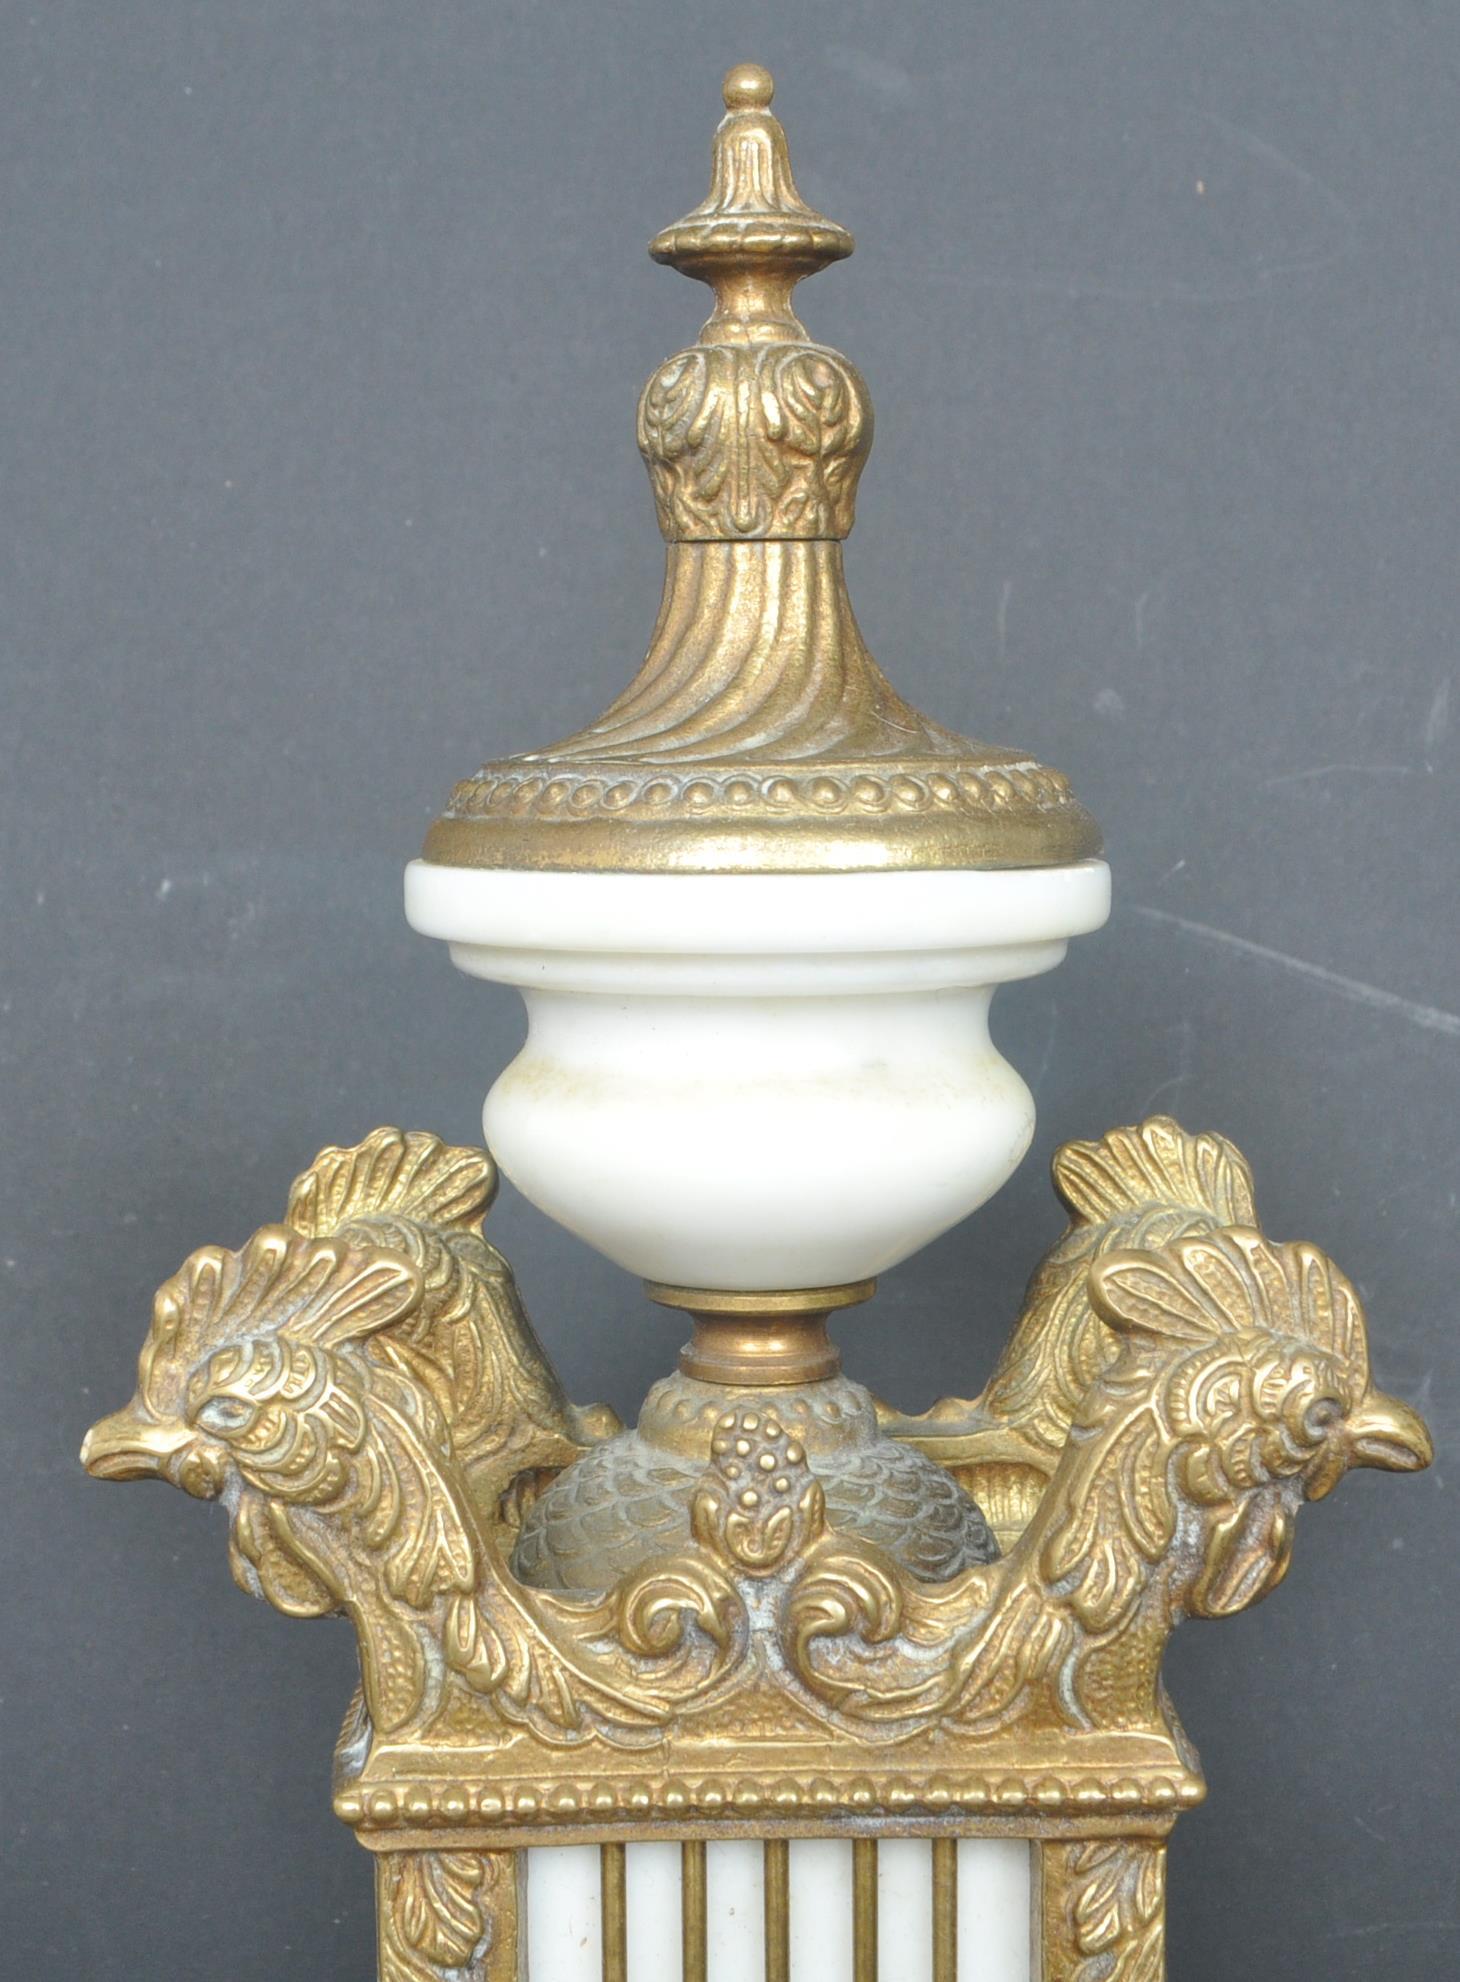 EARLY 20TH CENTURY GERMAN CONTINENTAL BRASS AND MARBLE CLOCK - Image 2 of 7